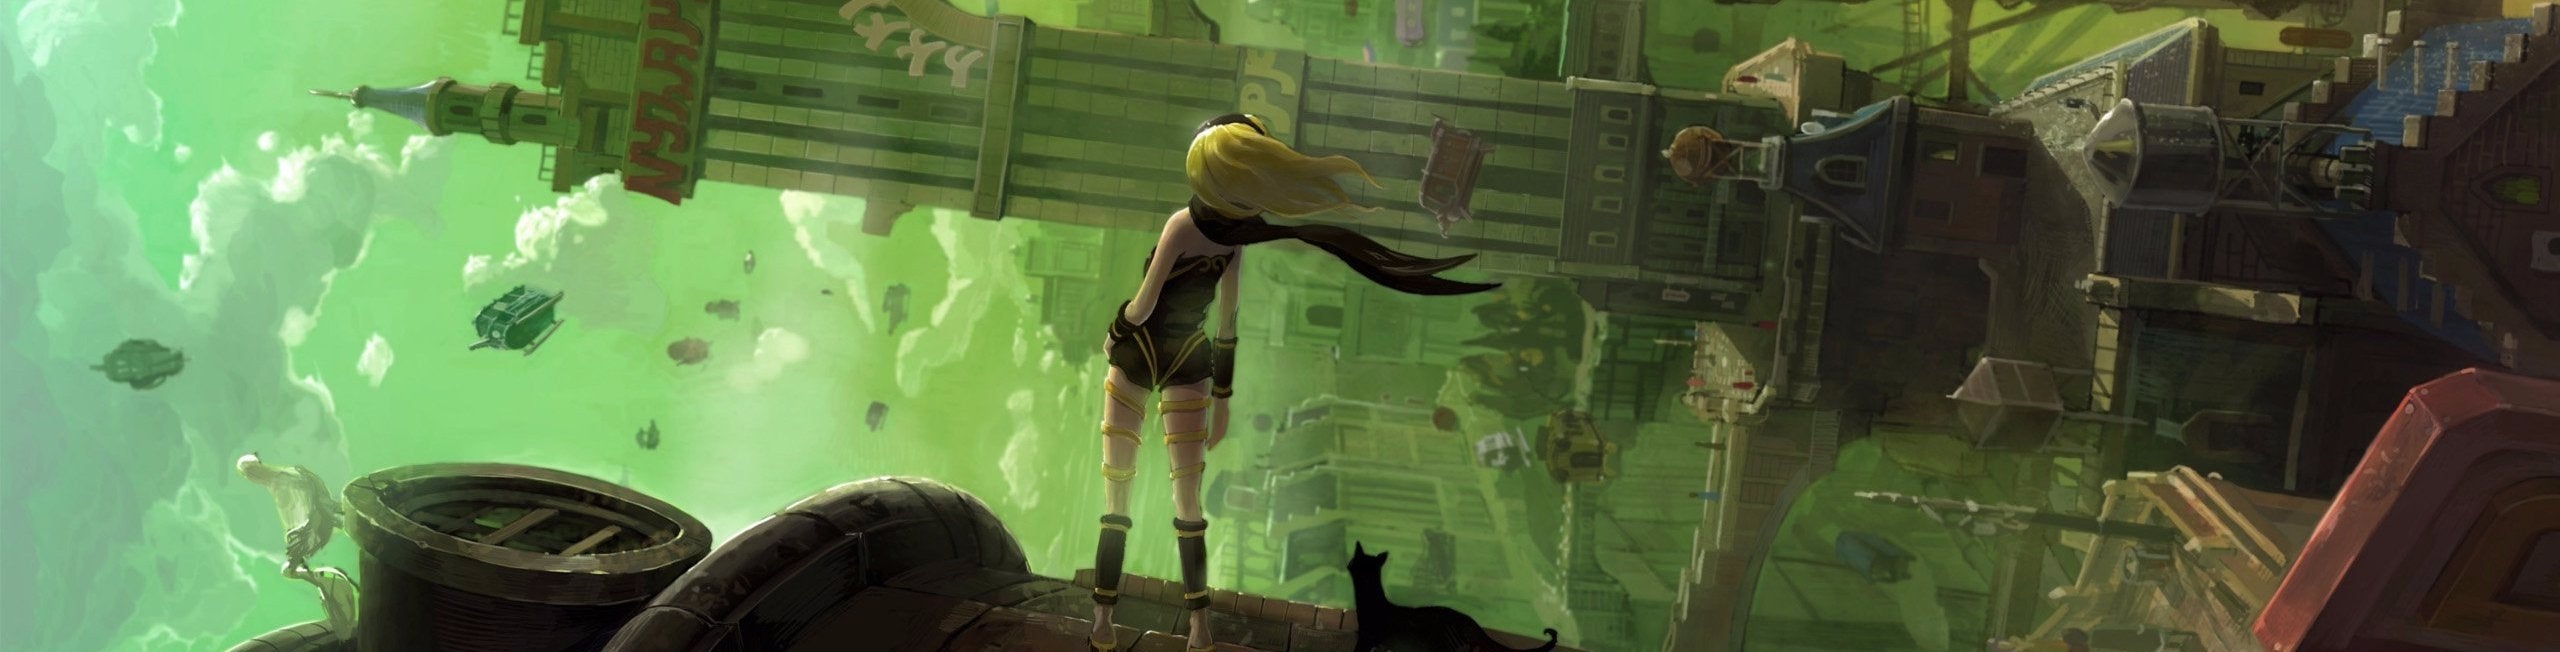 Image for Face-Off: Gravity Rush Remastered on PS4